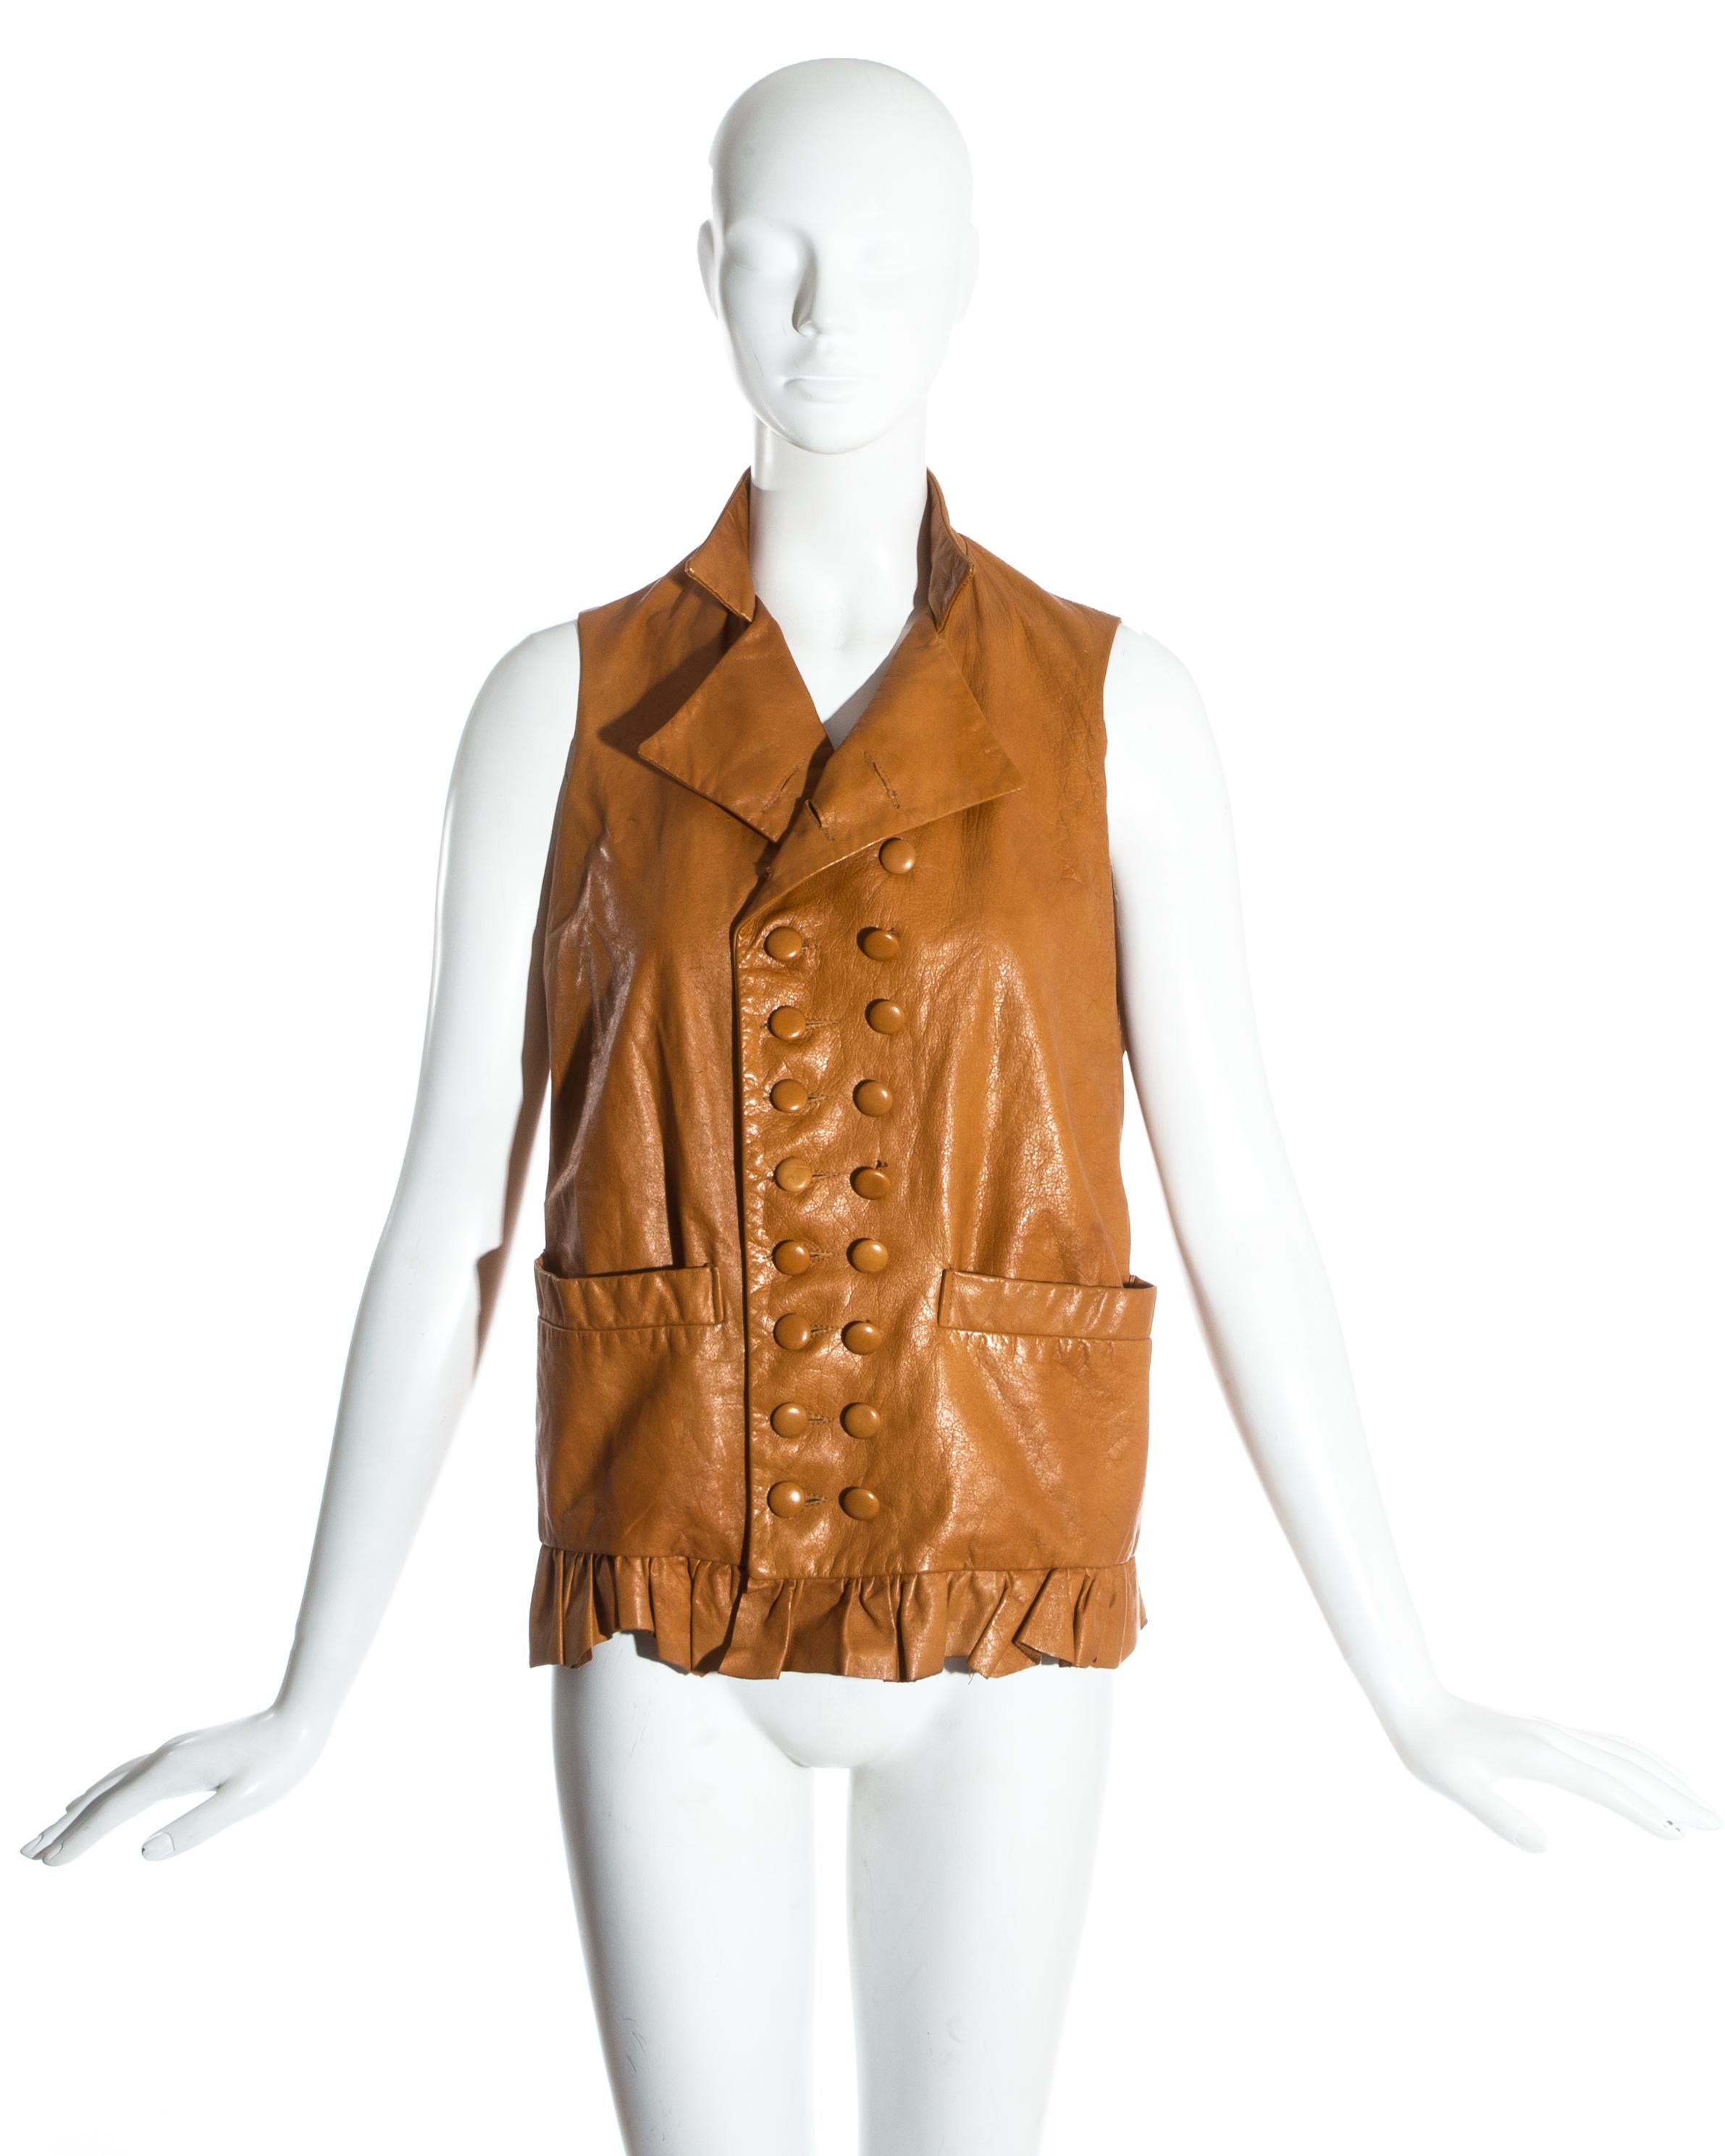 Worlds End by Vivienne Westwood and Malcolm McLaren. Unisex tan leather double breasted waistcoat. Mandarin collar, ruffled hem with raw finish, matching leather buttons and cream cotton lining.

Pirates, Fall-Winter 1981